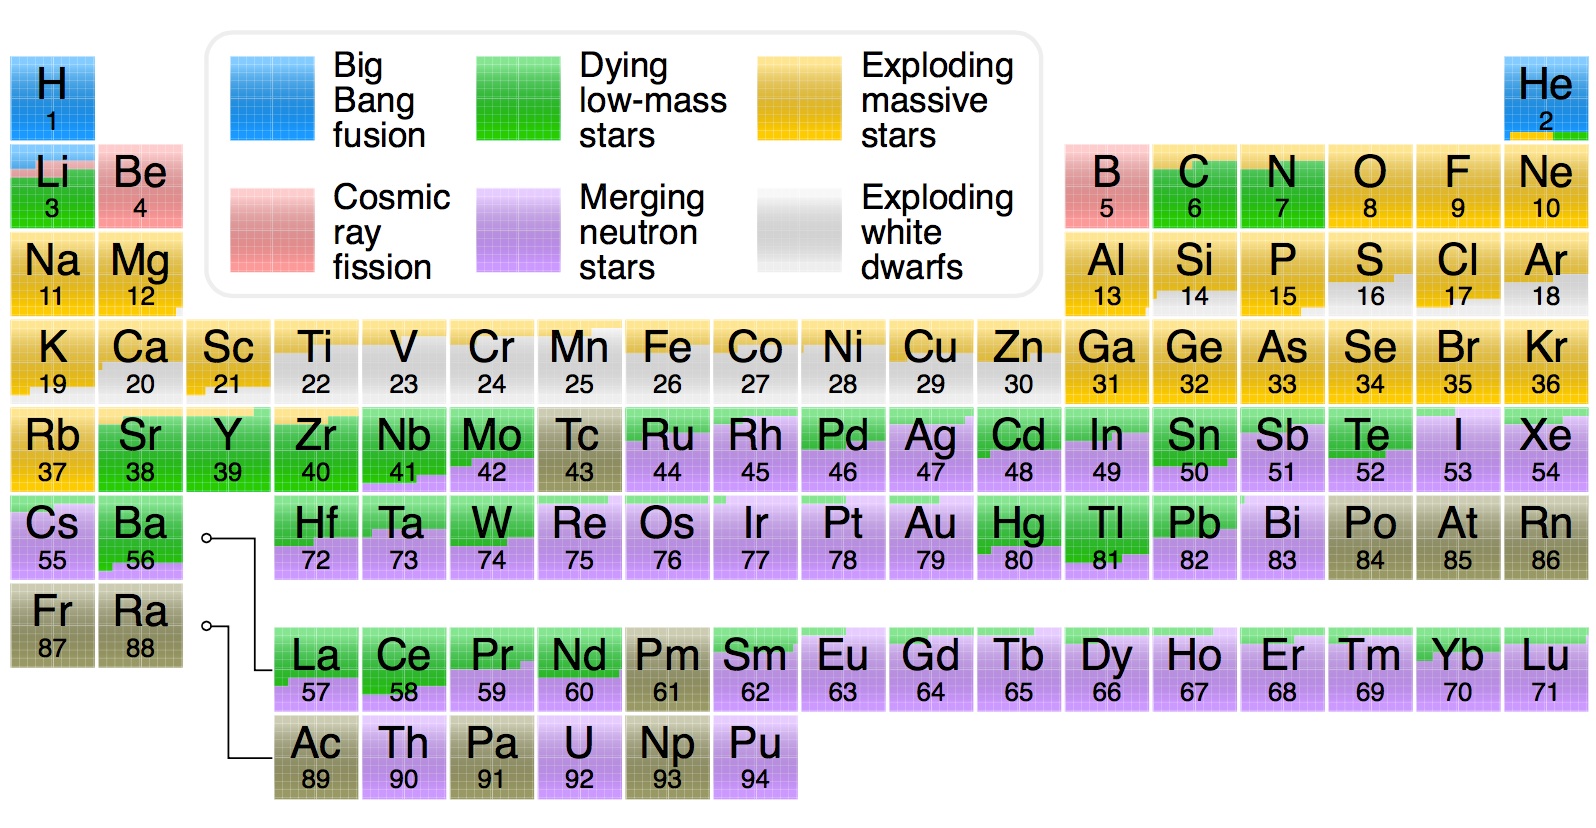 nucleosynthesis periodic table by Cmglee wikipaedia